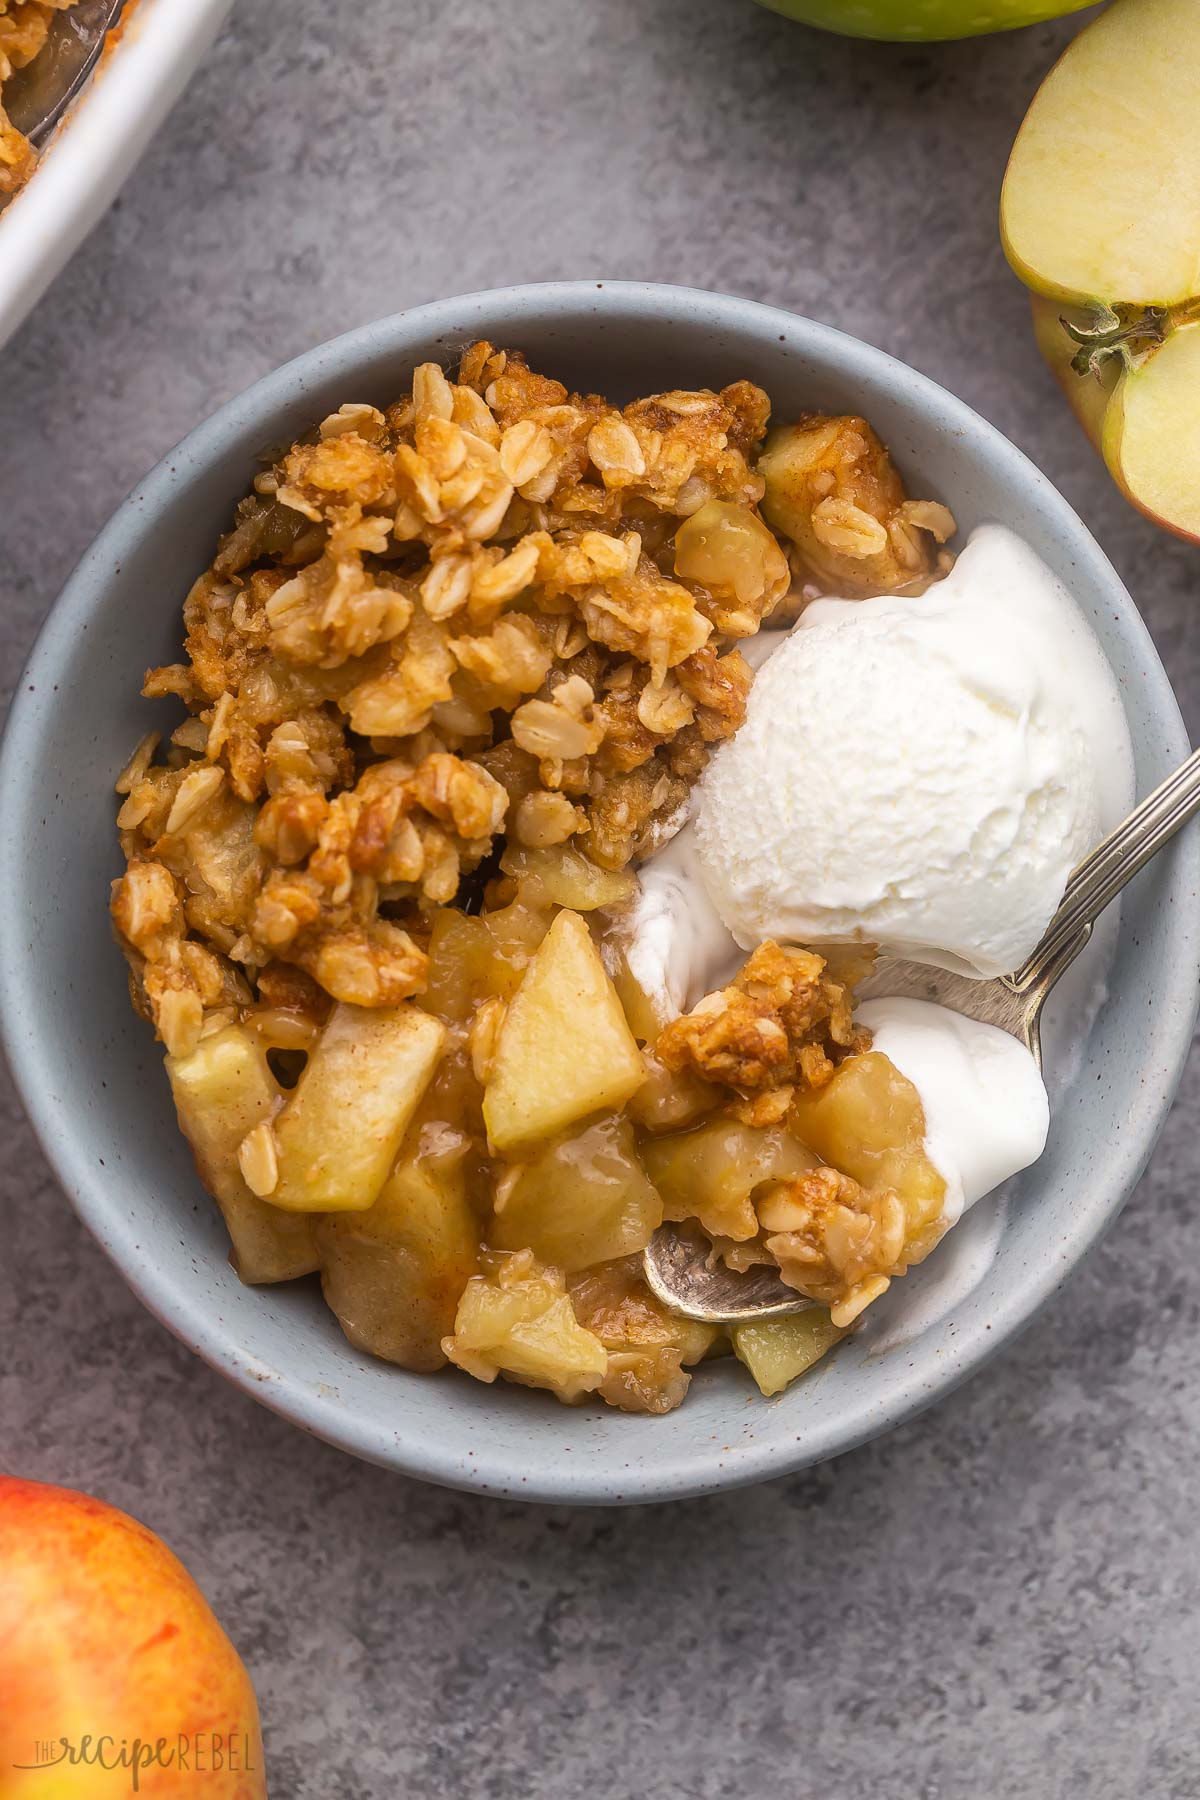 a spoon scooping ice cream and apple crisp out of a blue bowl.